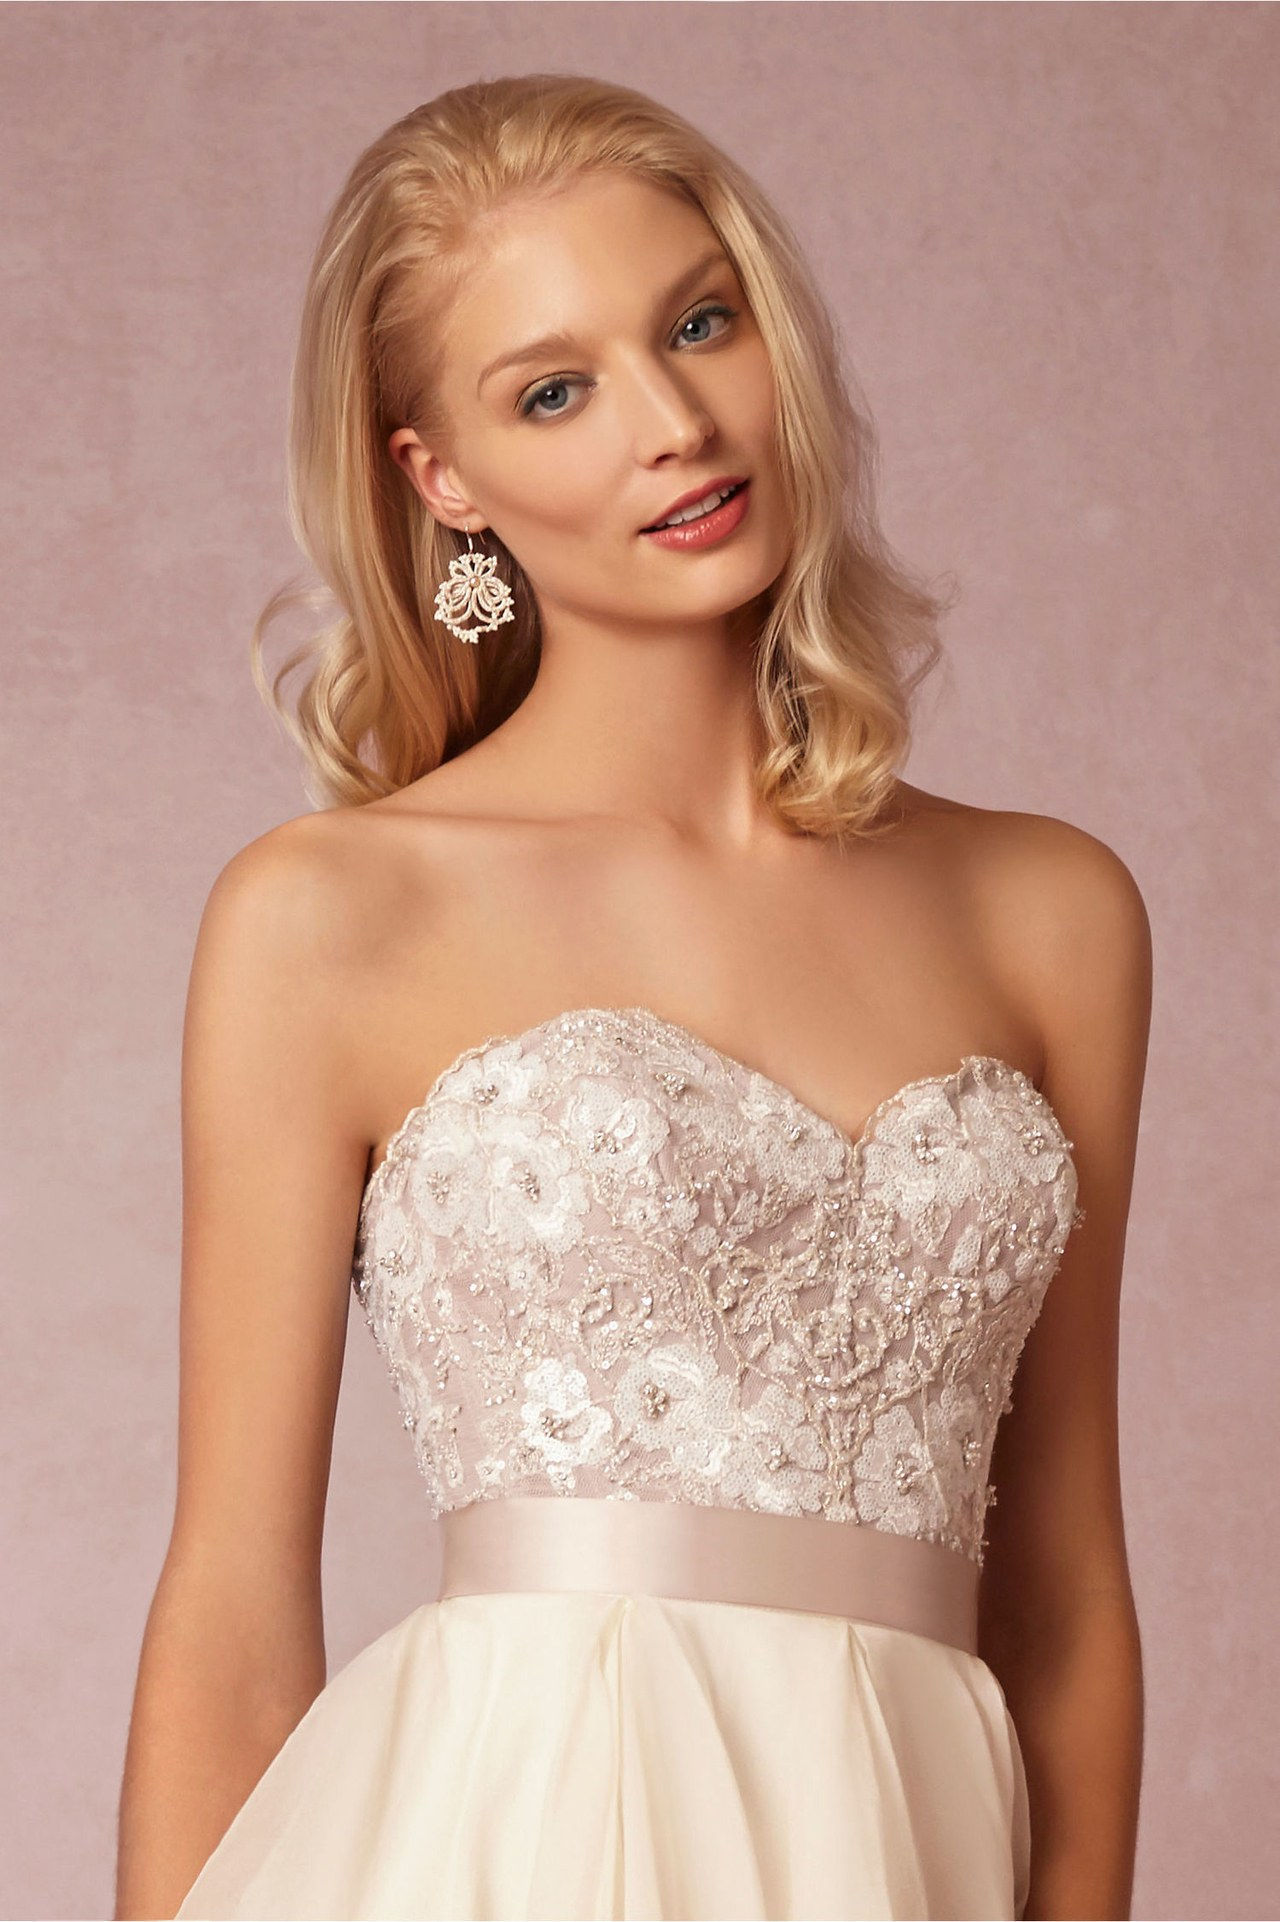 4A 2 in 1 wedding dresses wedding gowns mix and match wedding dresses bhldn 0430 courtesy